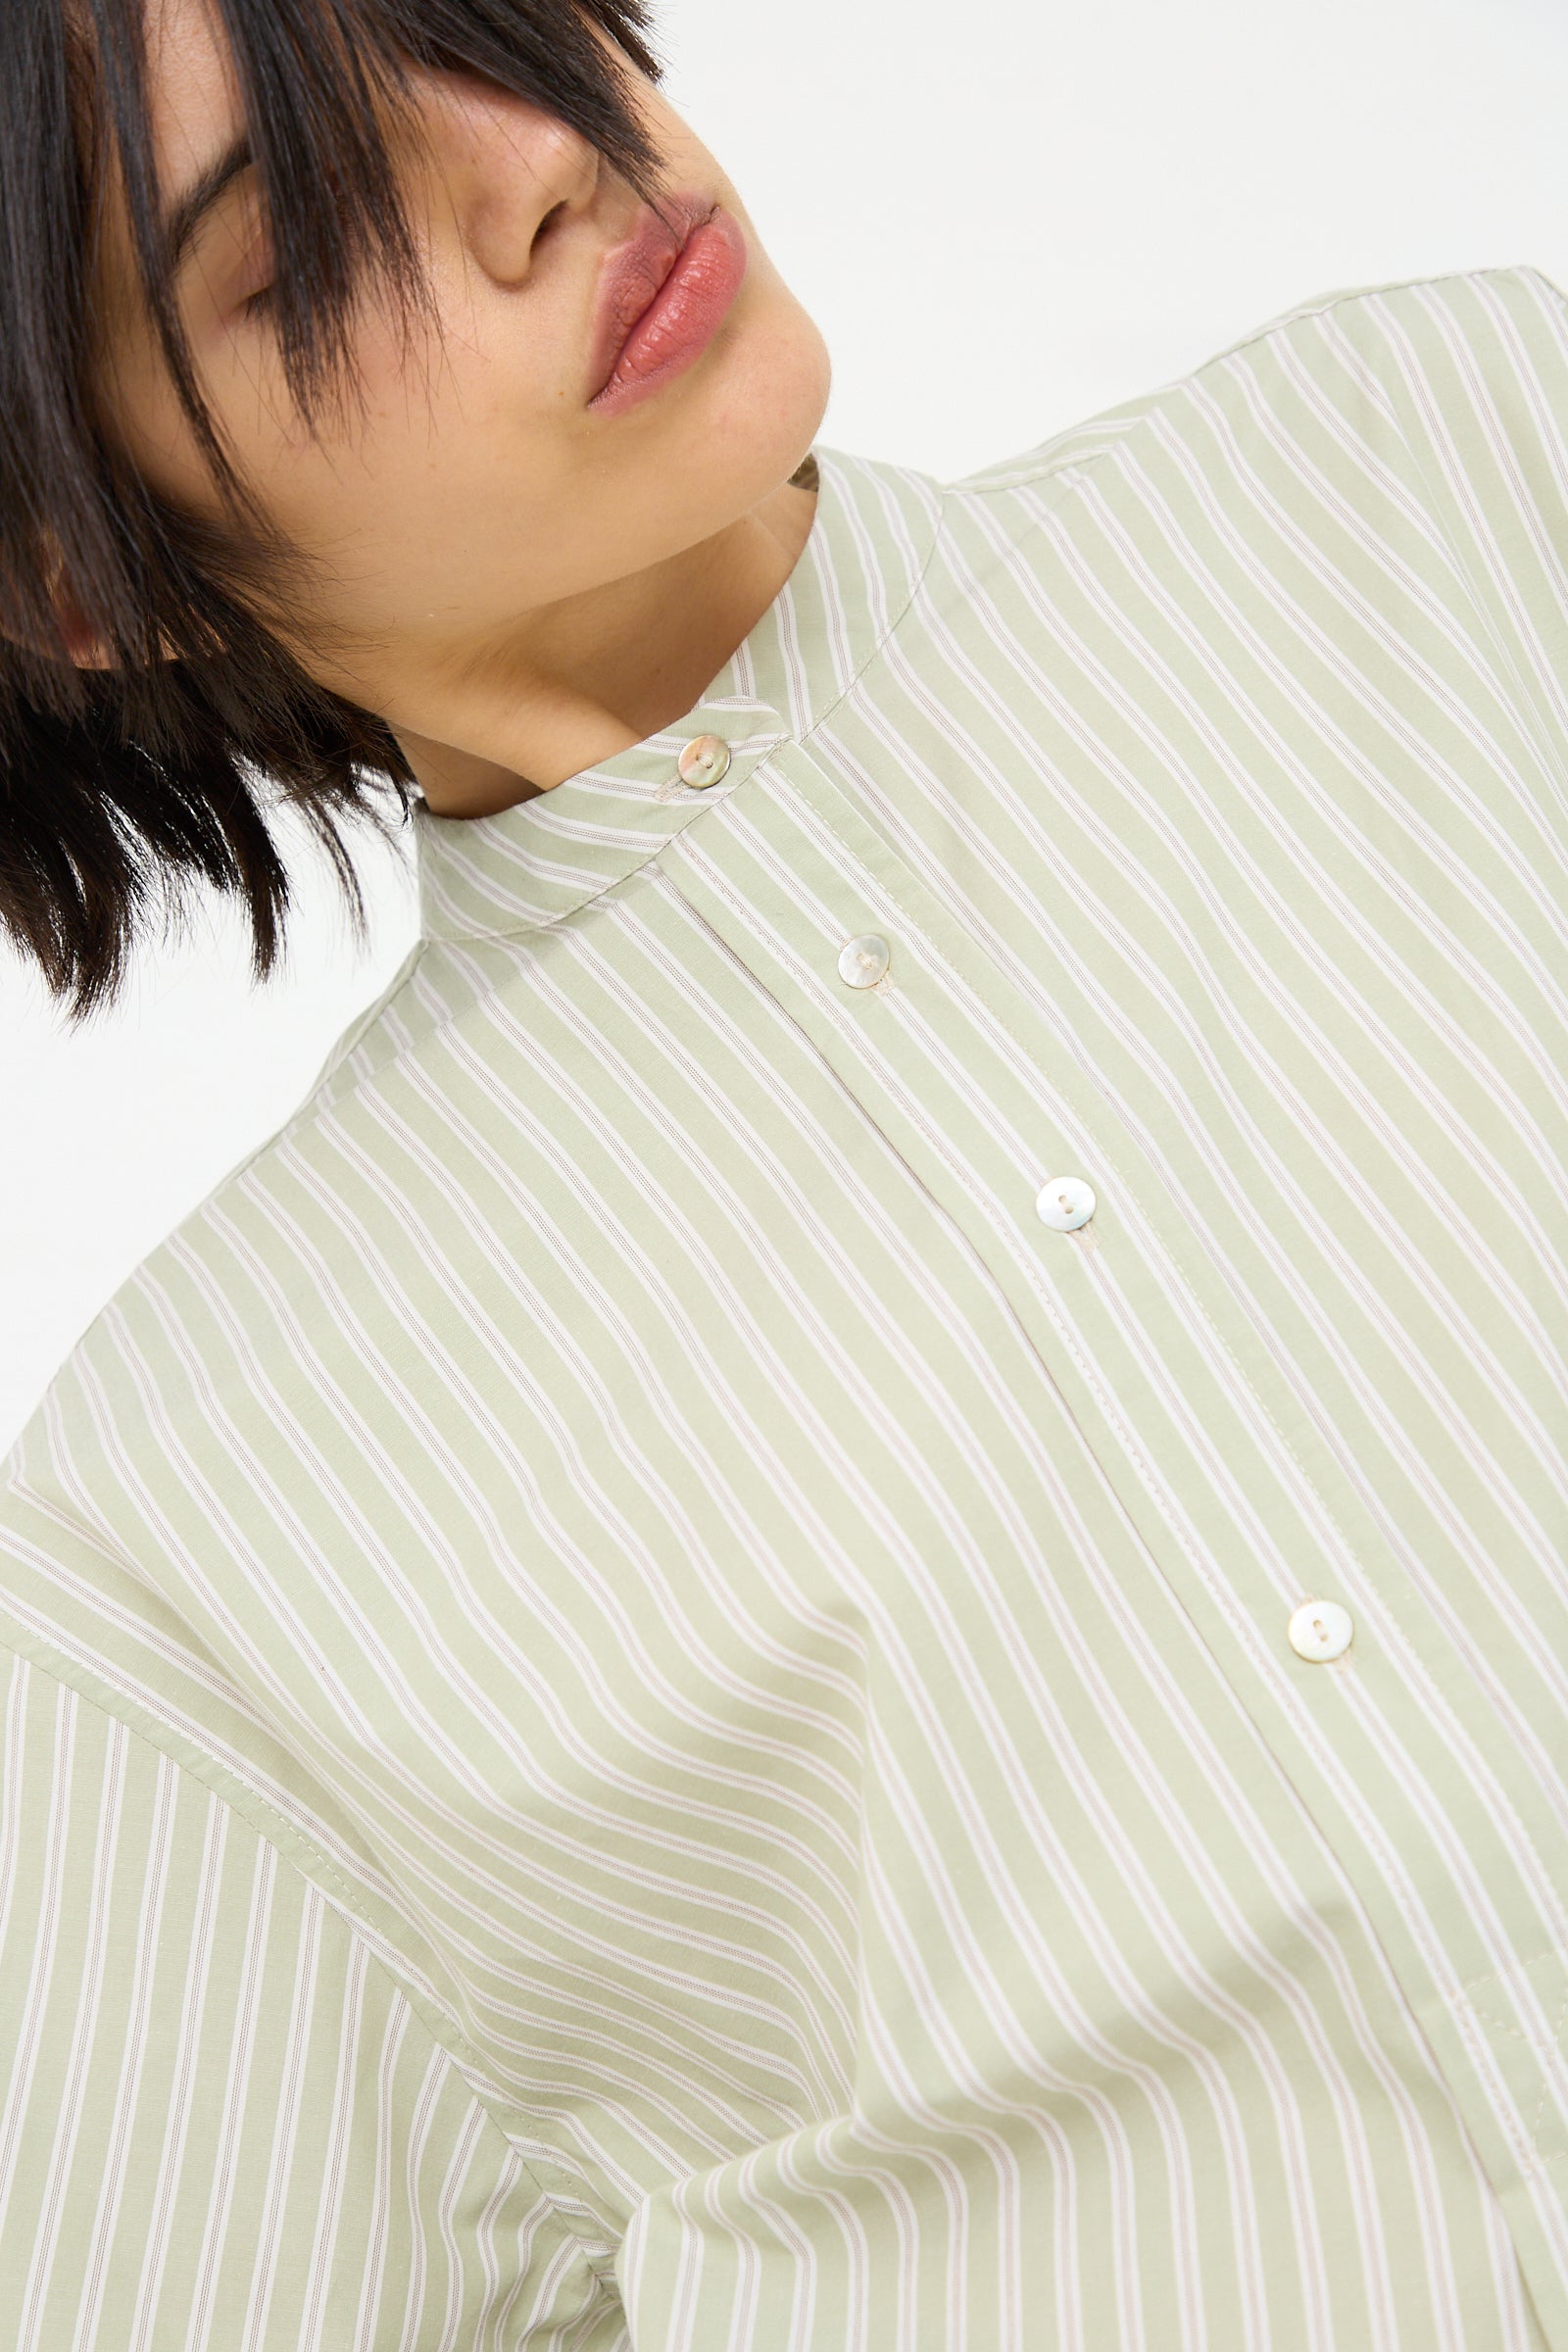 A close-up of a person in a Cawley Japanese Cotton Ines Shirt in Mint and Ecru with a buttoned collar. The person's face is partially obscured by their dark hair, and their eyes are closed.